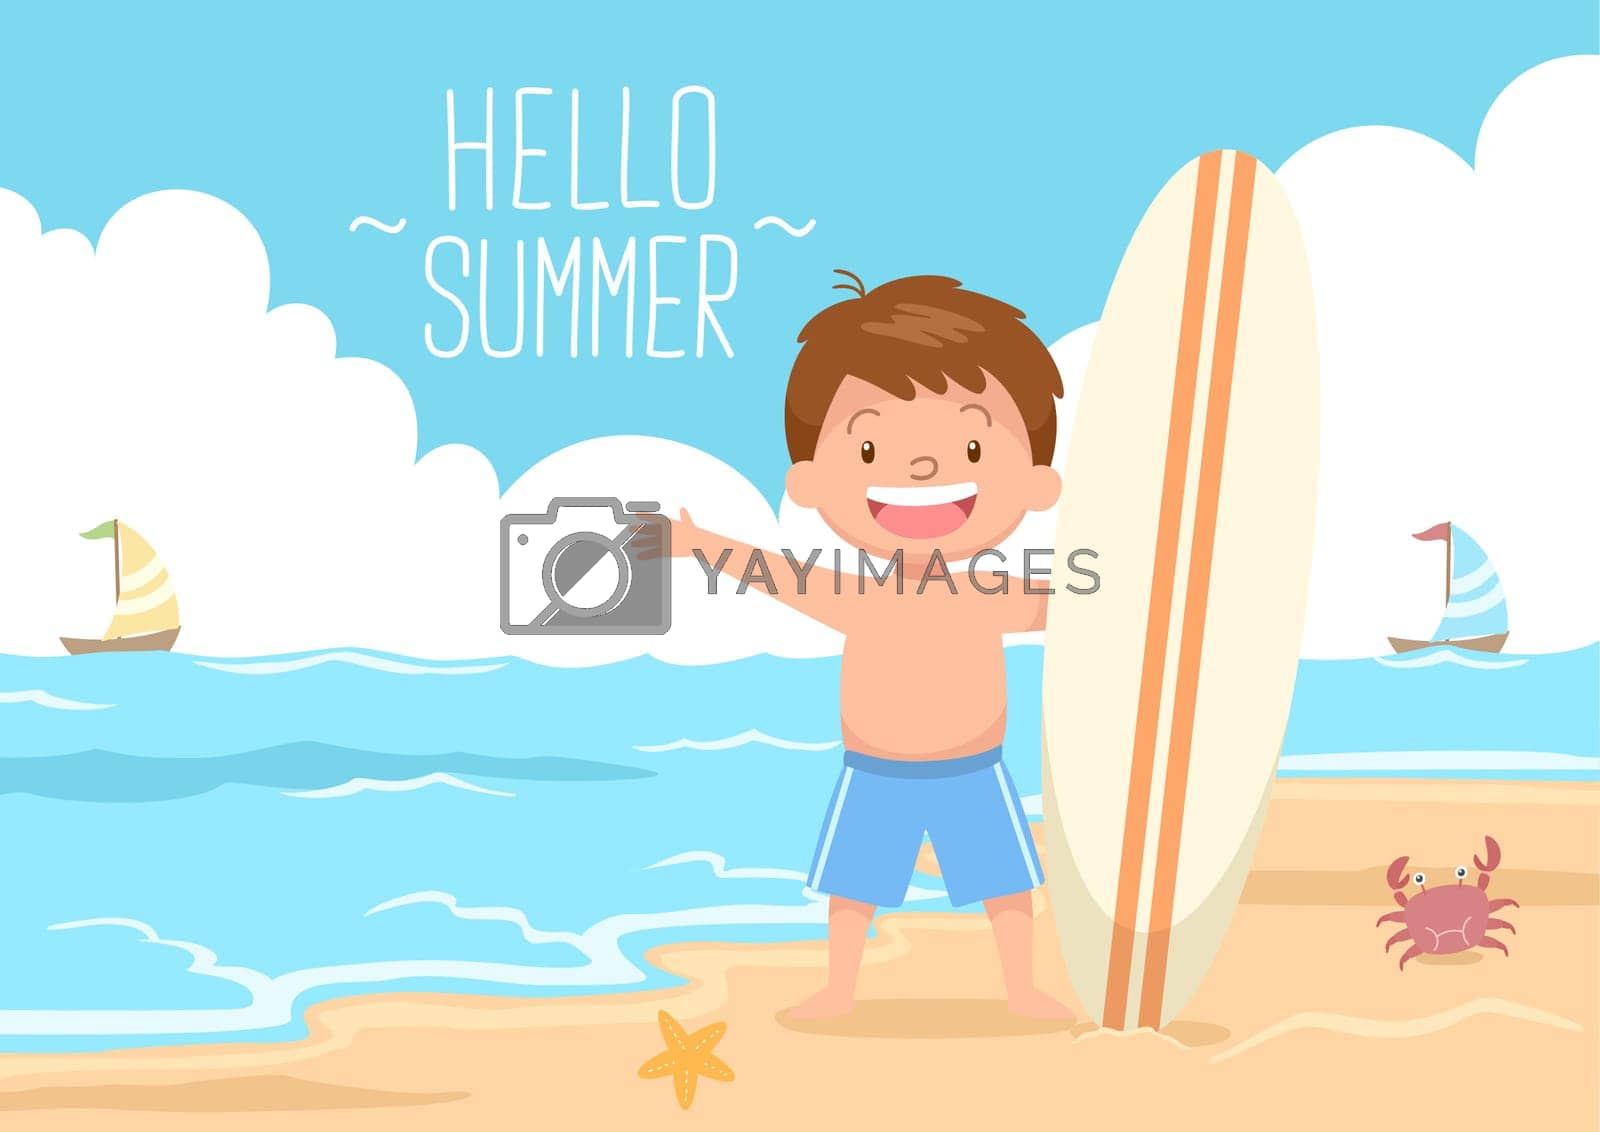 Royalty free image of cute kid holding surf board at the beach hello summer by JuneYap